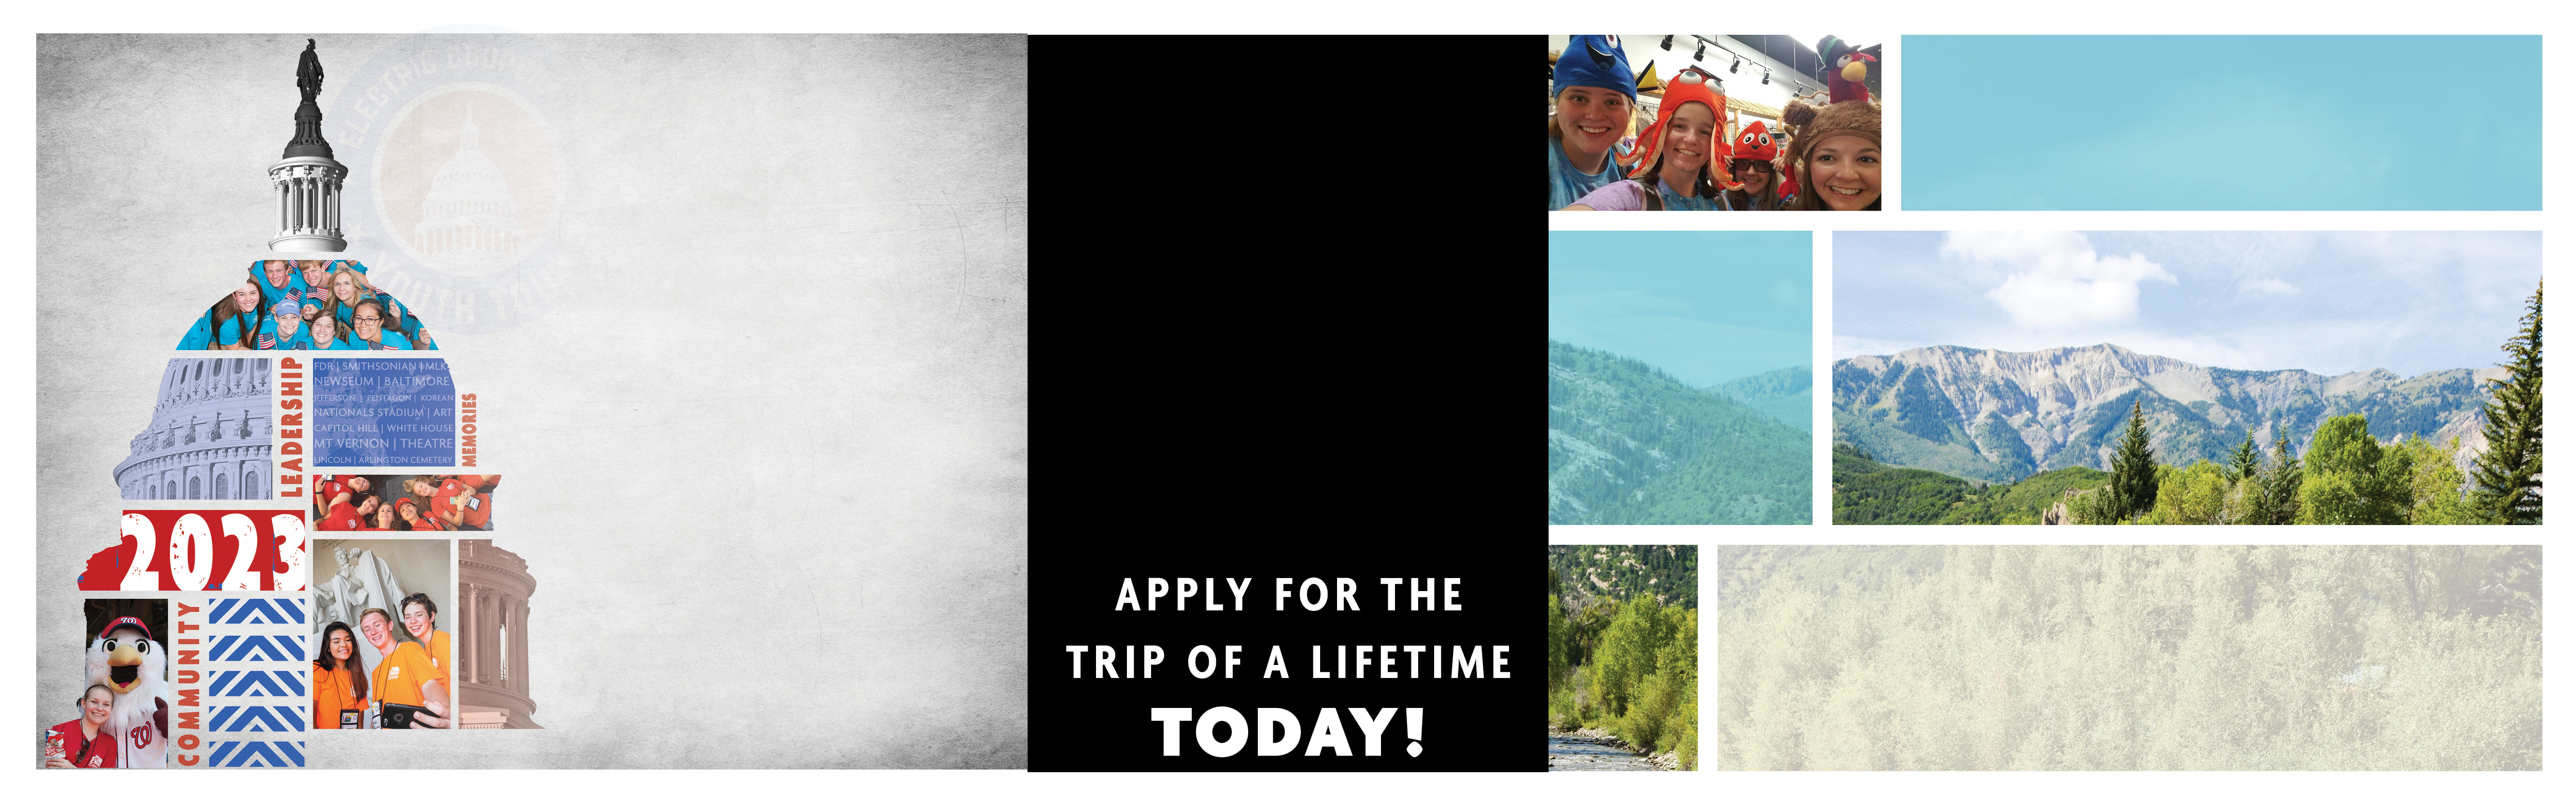 Apply by Dec 30, 2022 for a trip of a lifetime to either Electric Cooperative Youth Tour in Washington, D.C., or Cooperative Youth Leadership Camp in Steamboat Springs, Colorado. 